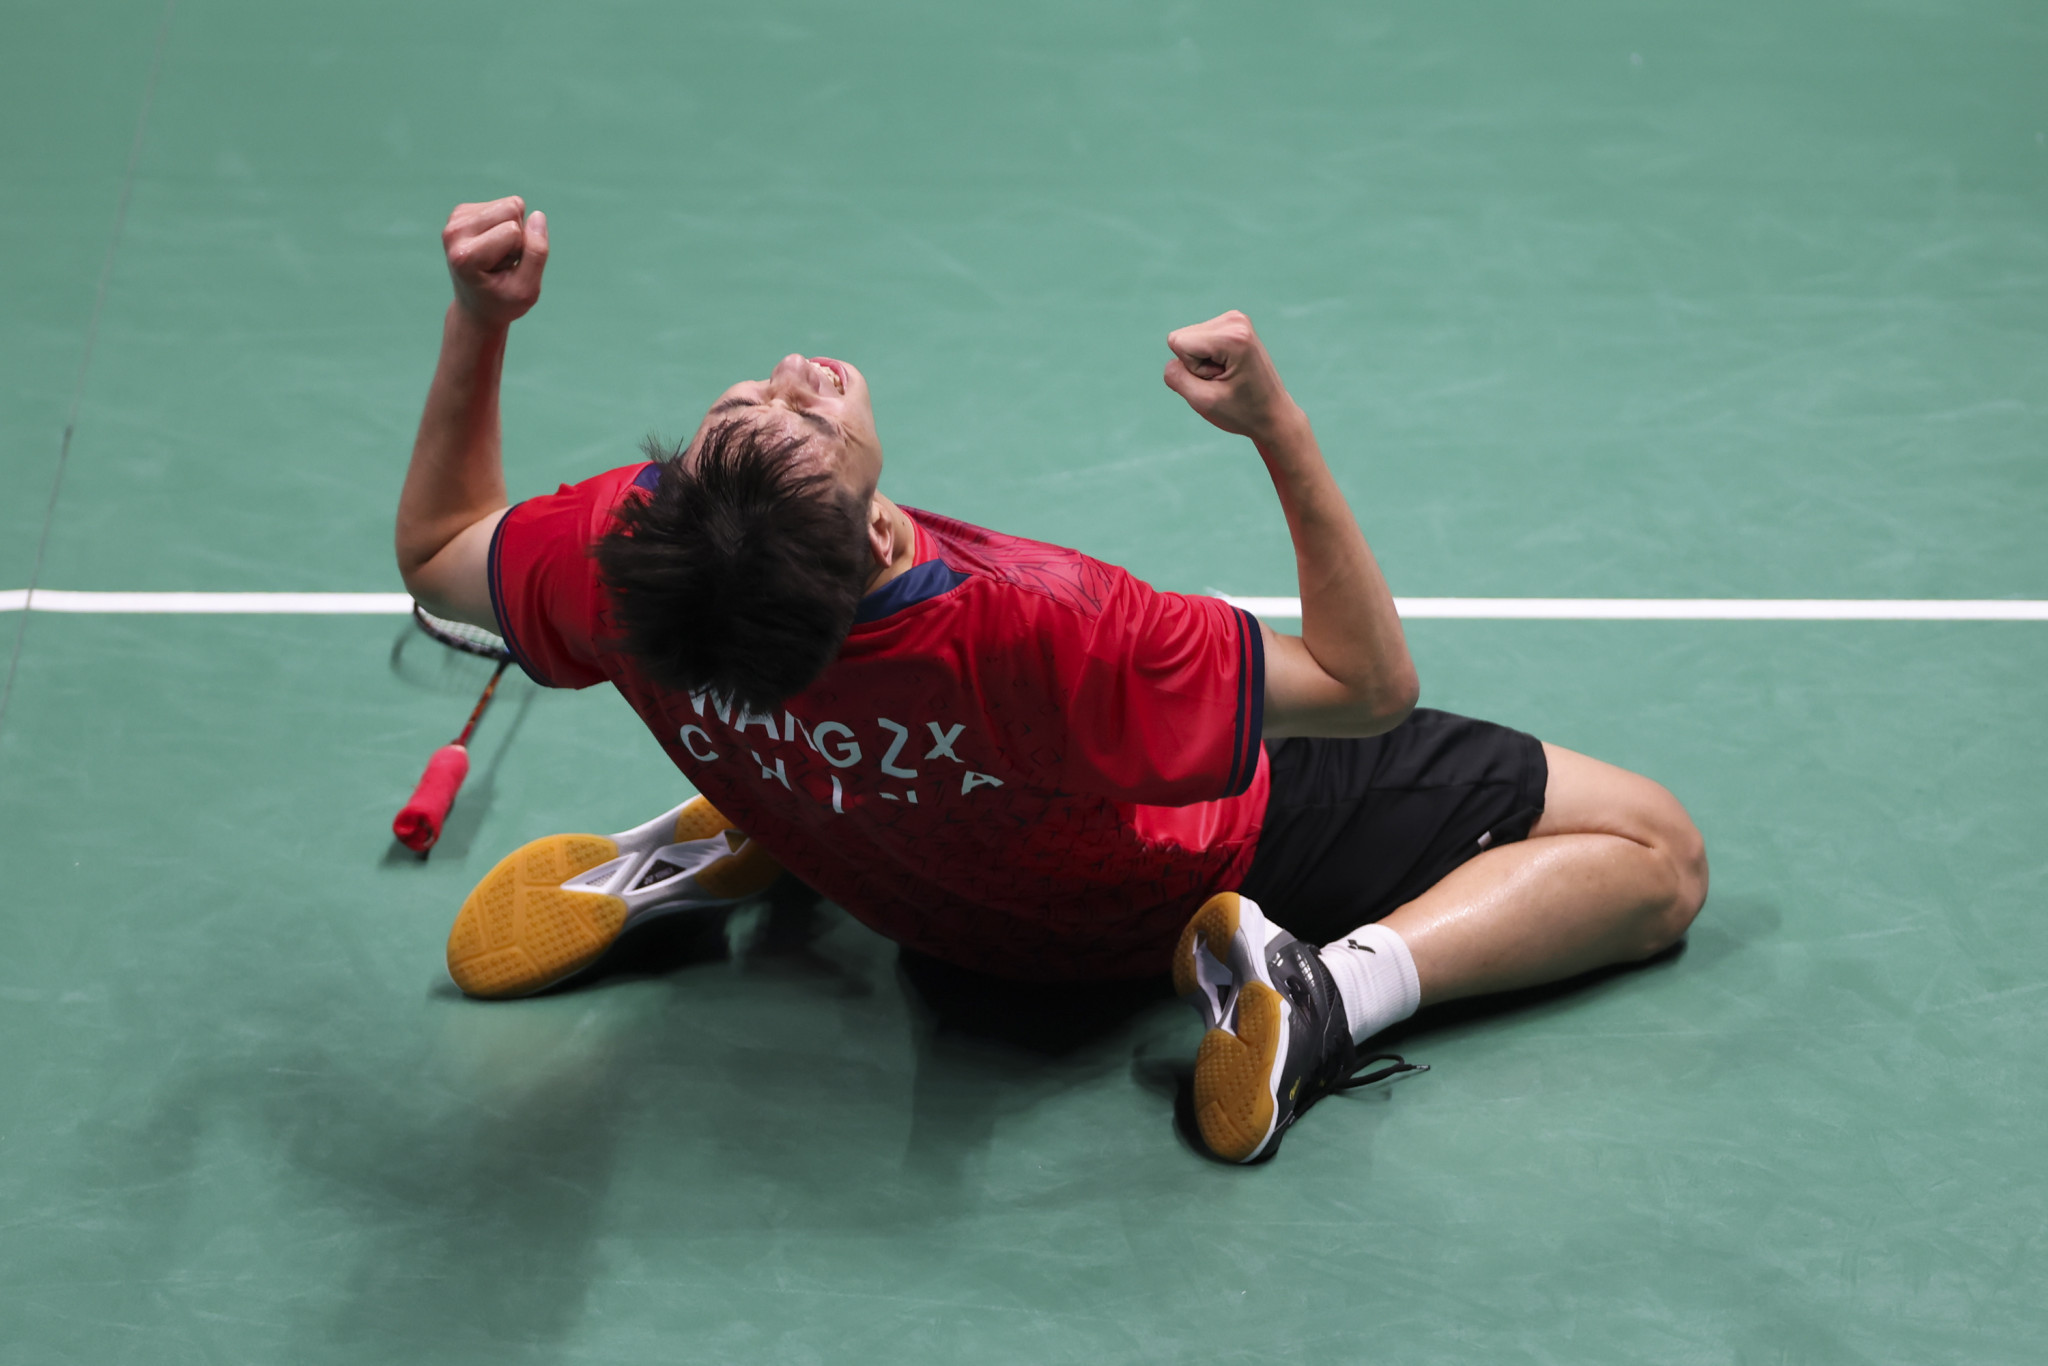 However, Wang proved to be too strong as he surged to a 21-16, 21-14 win for the final badminton gold medal of Chengdu 2021 ©Chengdu 2021